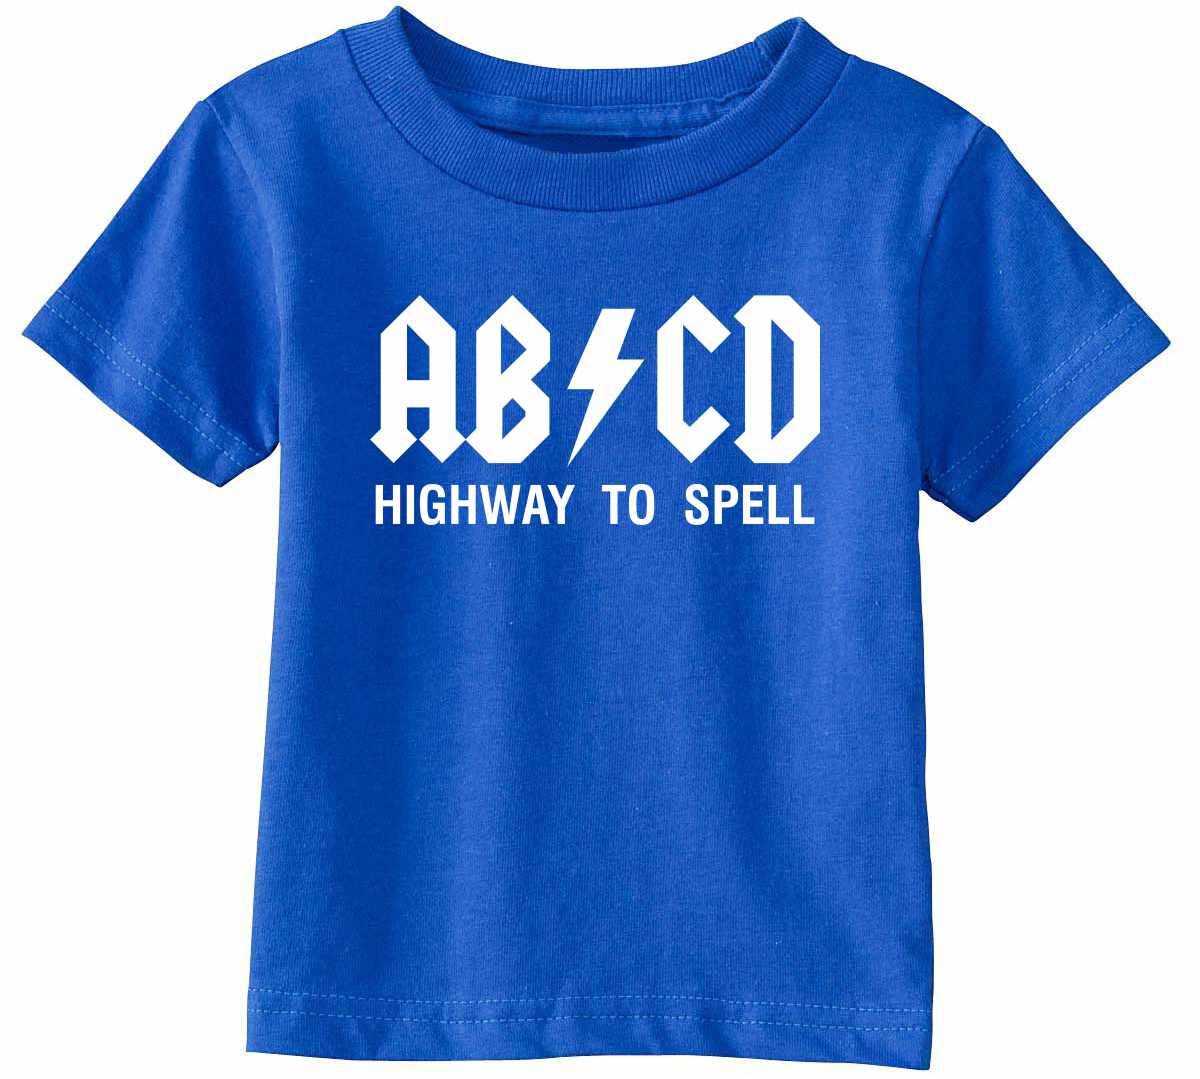 ABCD Highway To Spell on Infant-Toddler T-Shirt (#1236-7)